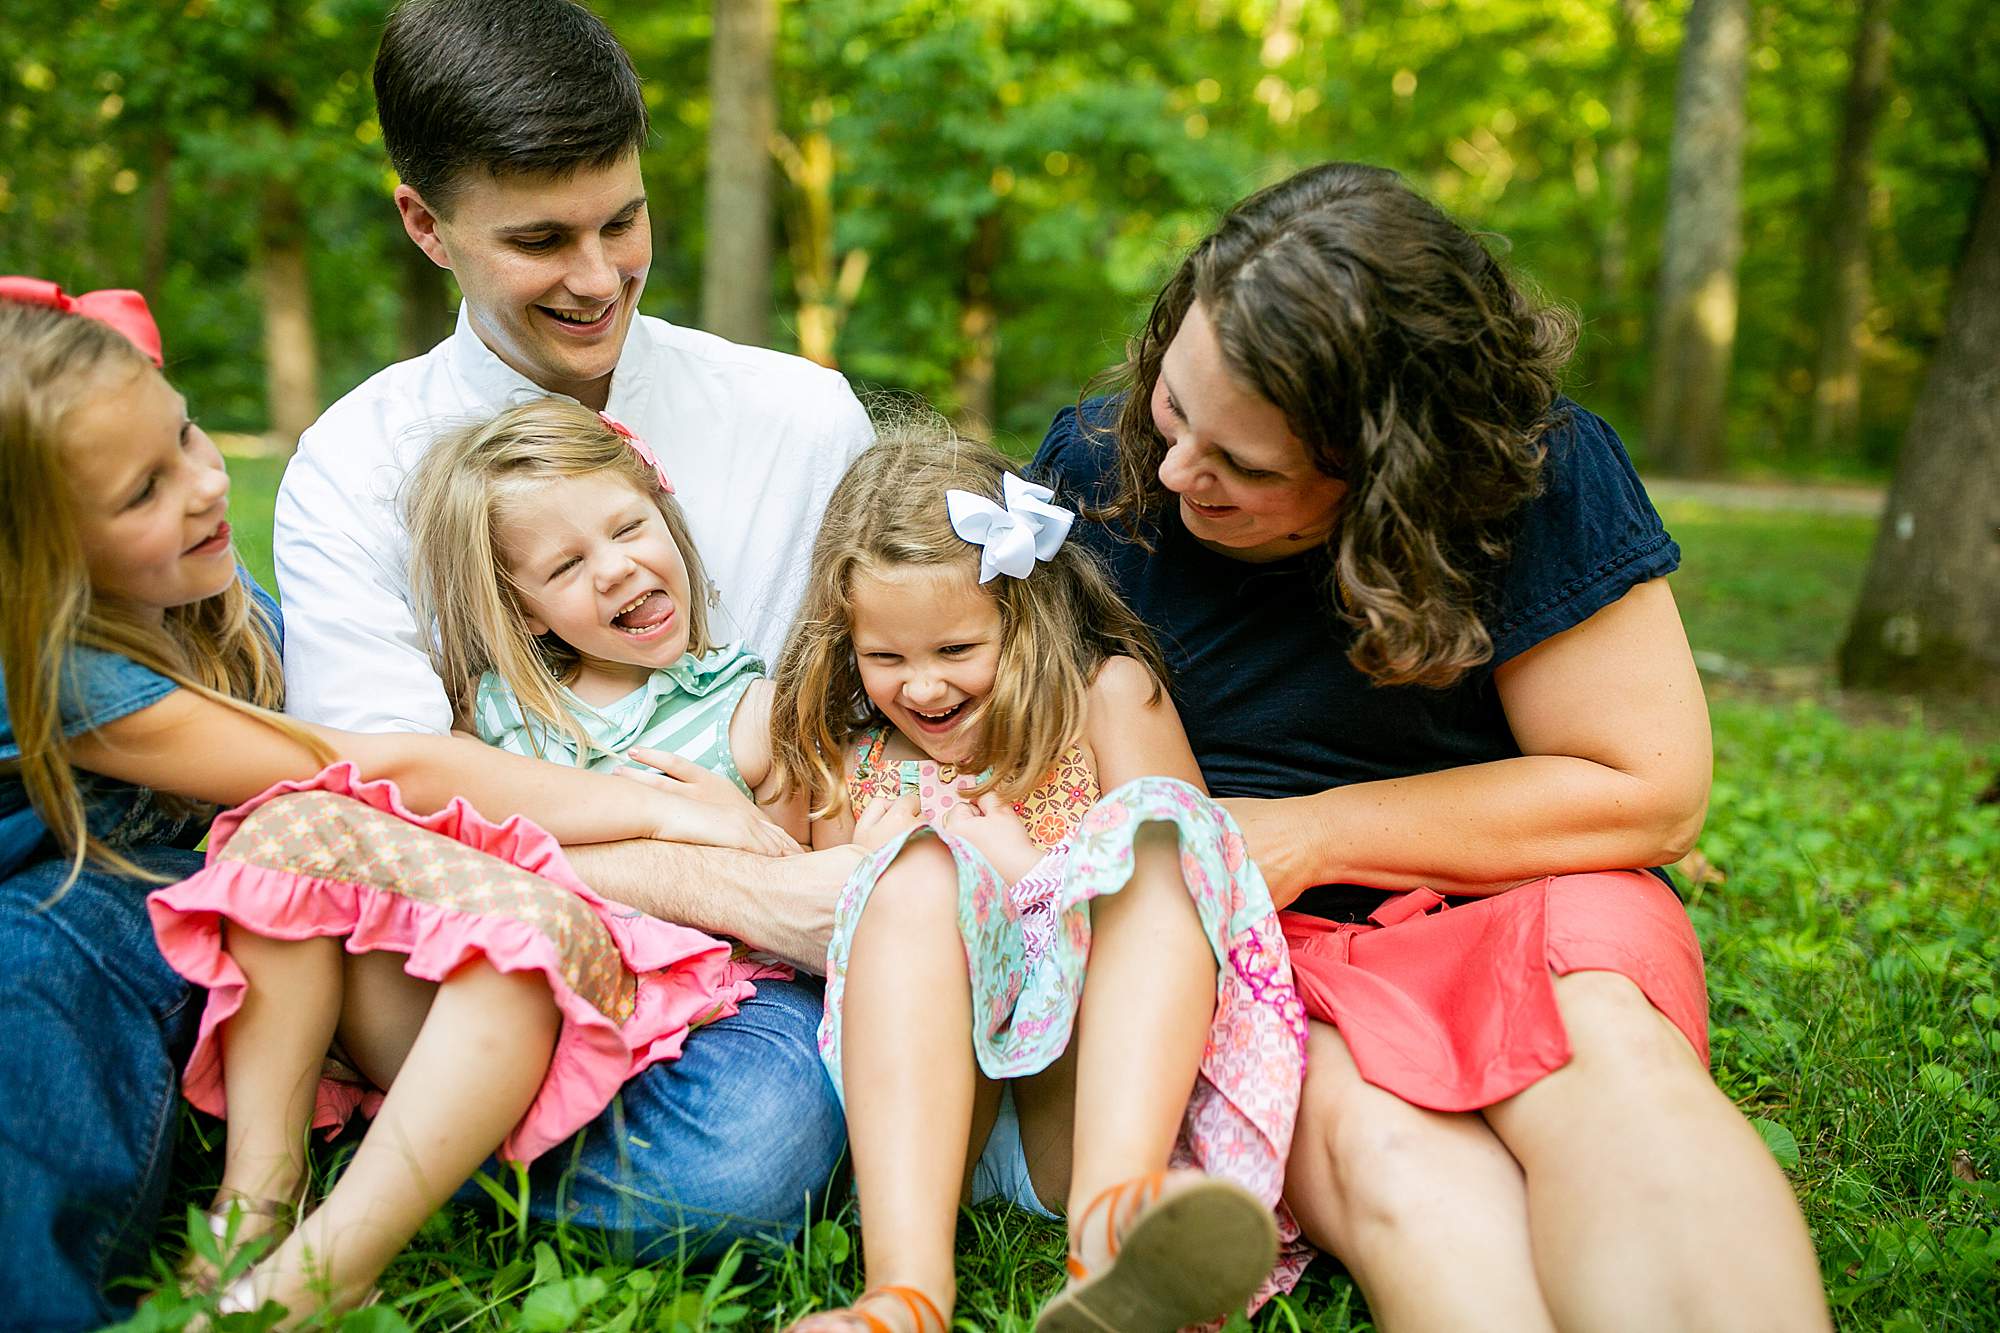 Thinking of locations for your family session can be daunting! It can be pressure choosing somewhere meaningful, beautiful and a reflection of your family.